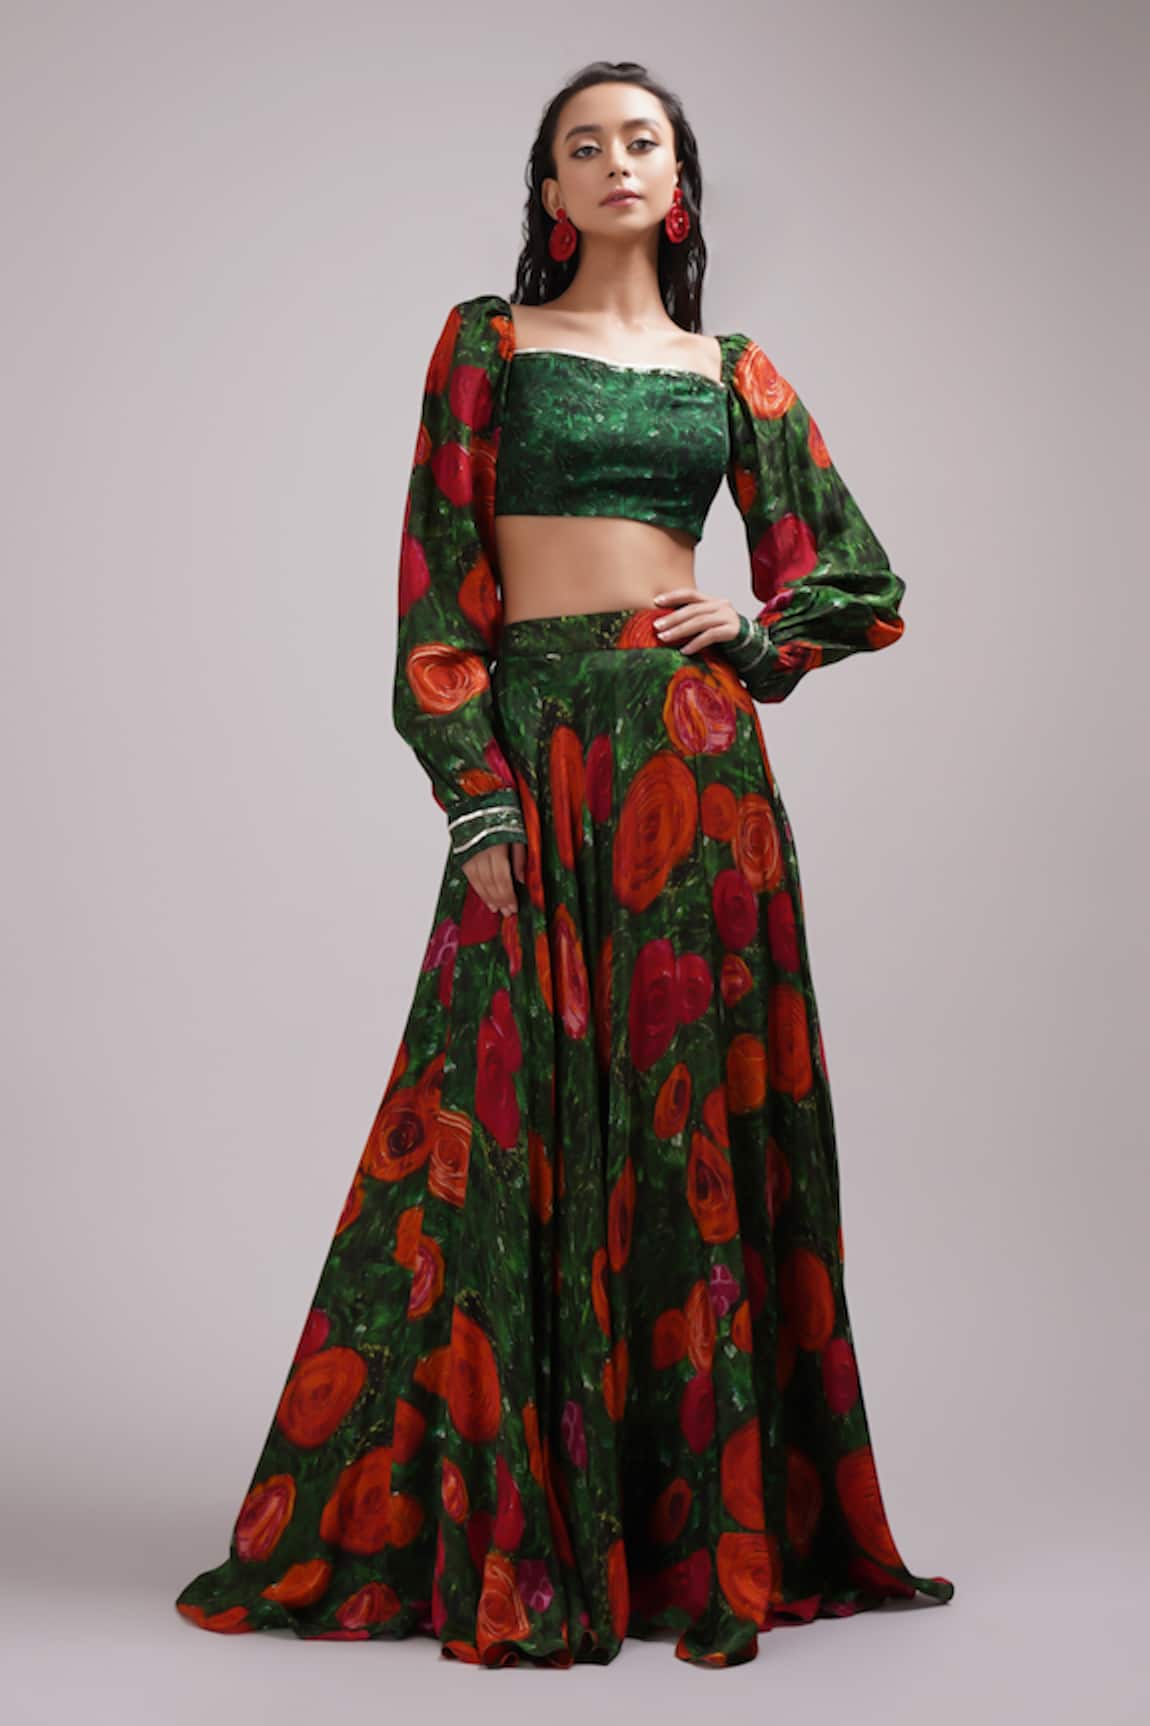 Breathe by Aakanksha Singh Calytrix Abstract Print Skirt With Top